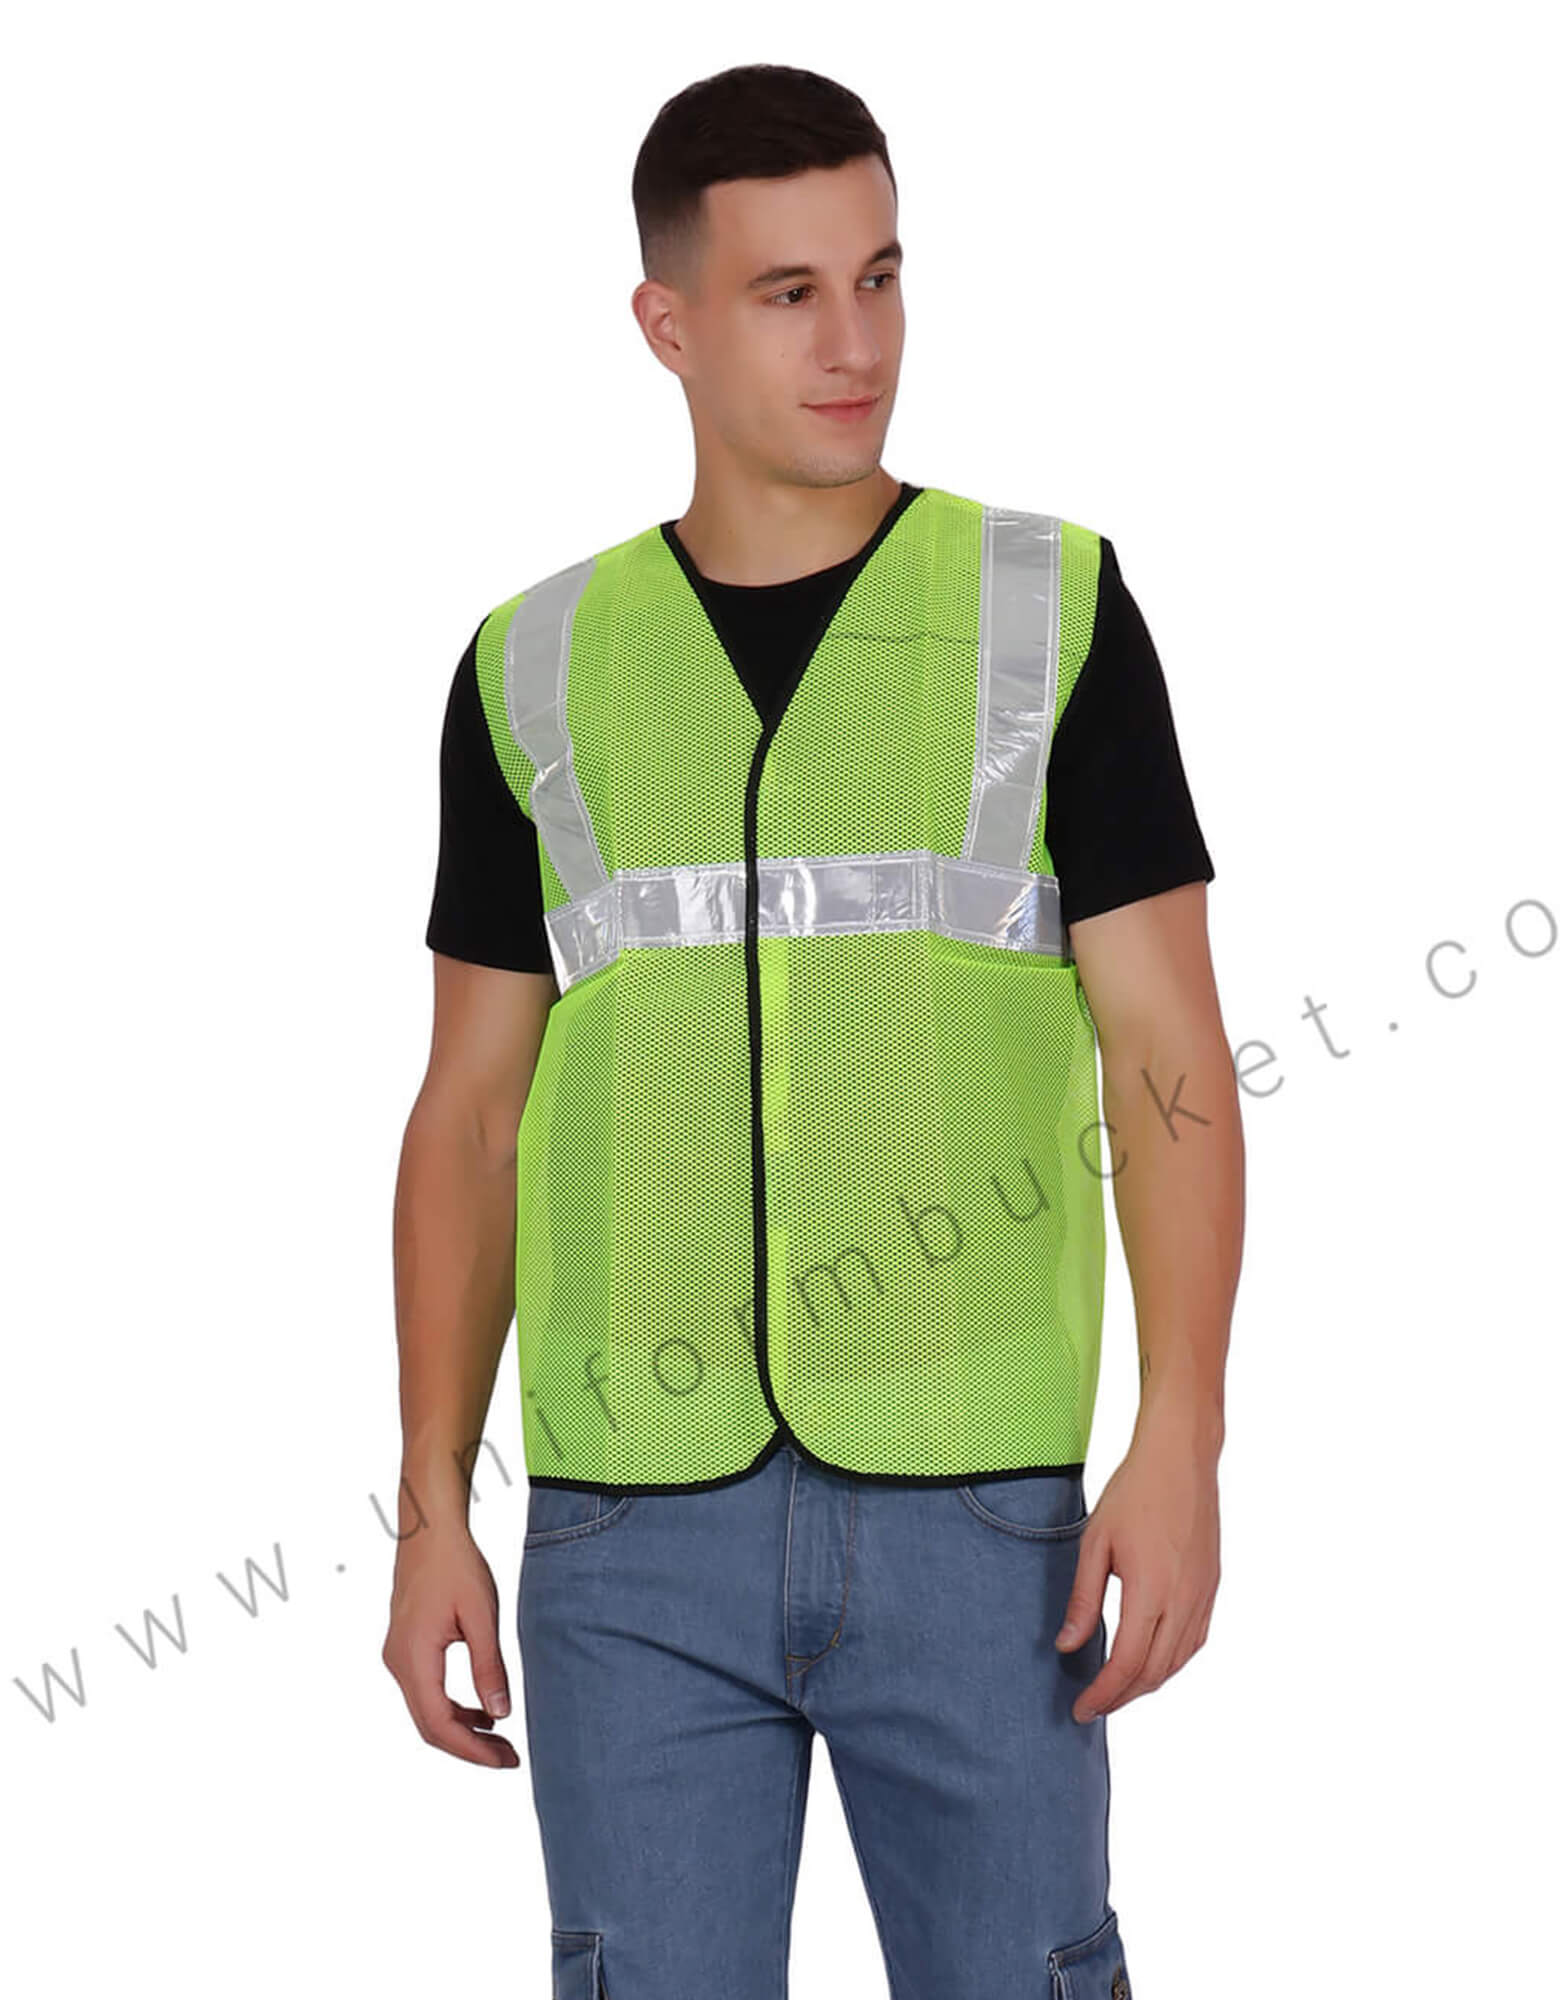 Net Safety Vest With Broad Visibility Stripes